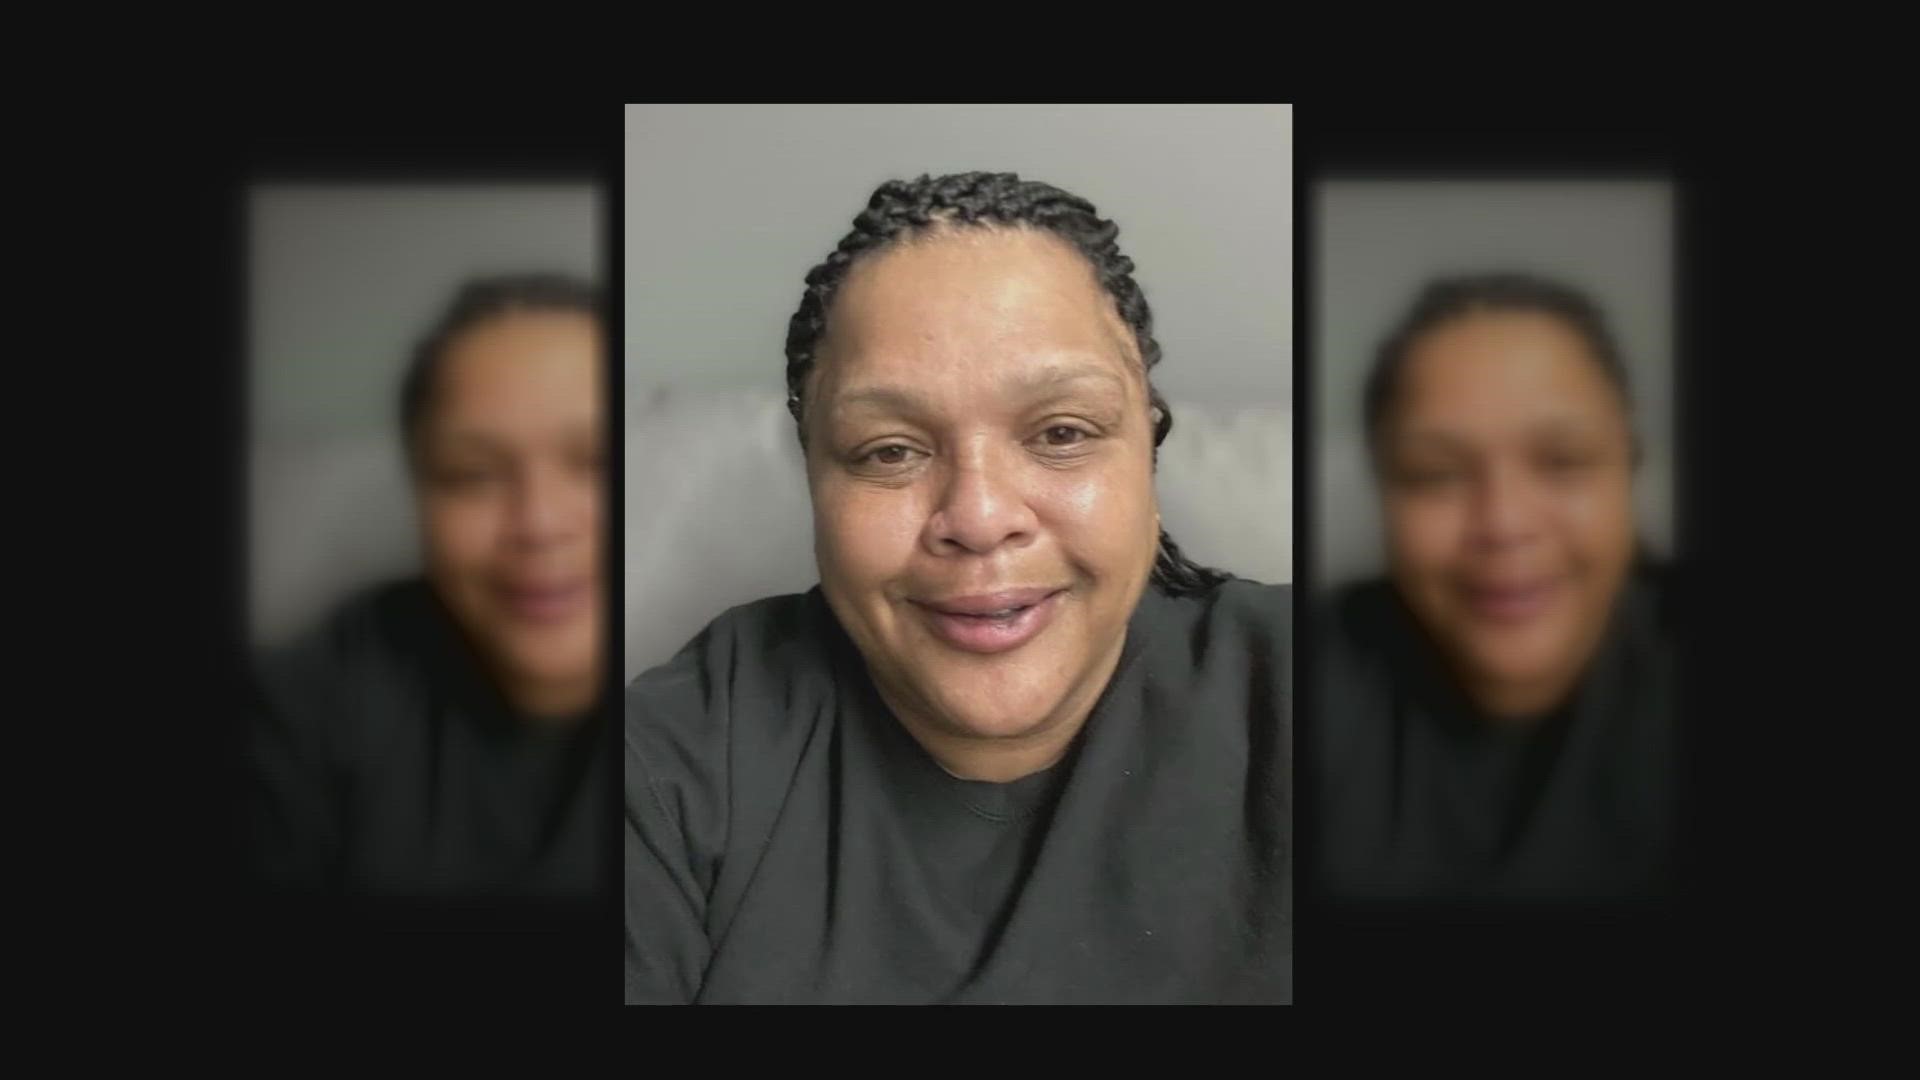 A 50-year-old woman who moved away from New Orleans when her son was shot and killed last year, was shot and killed on Mardi Gras after returning to be with family.